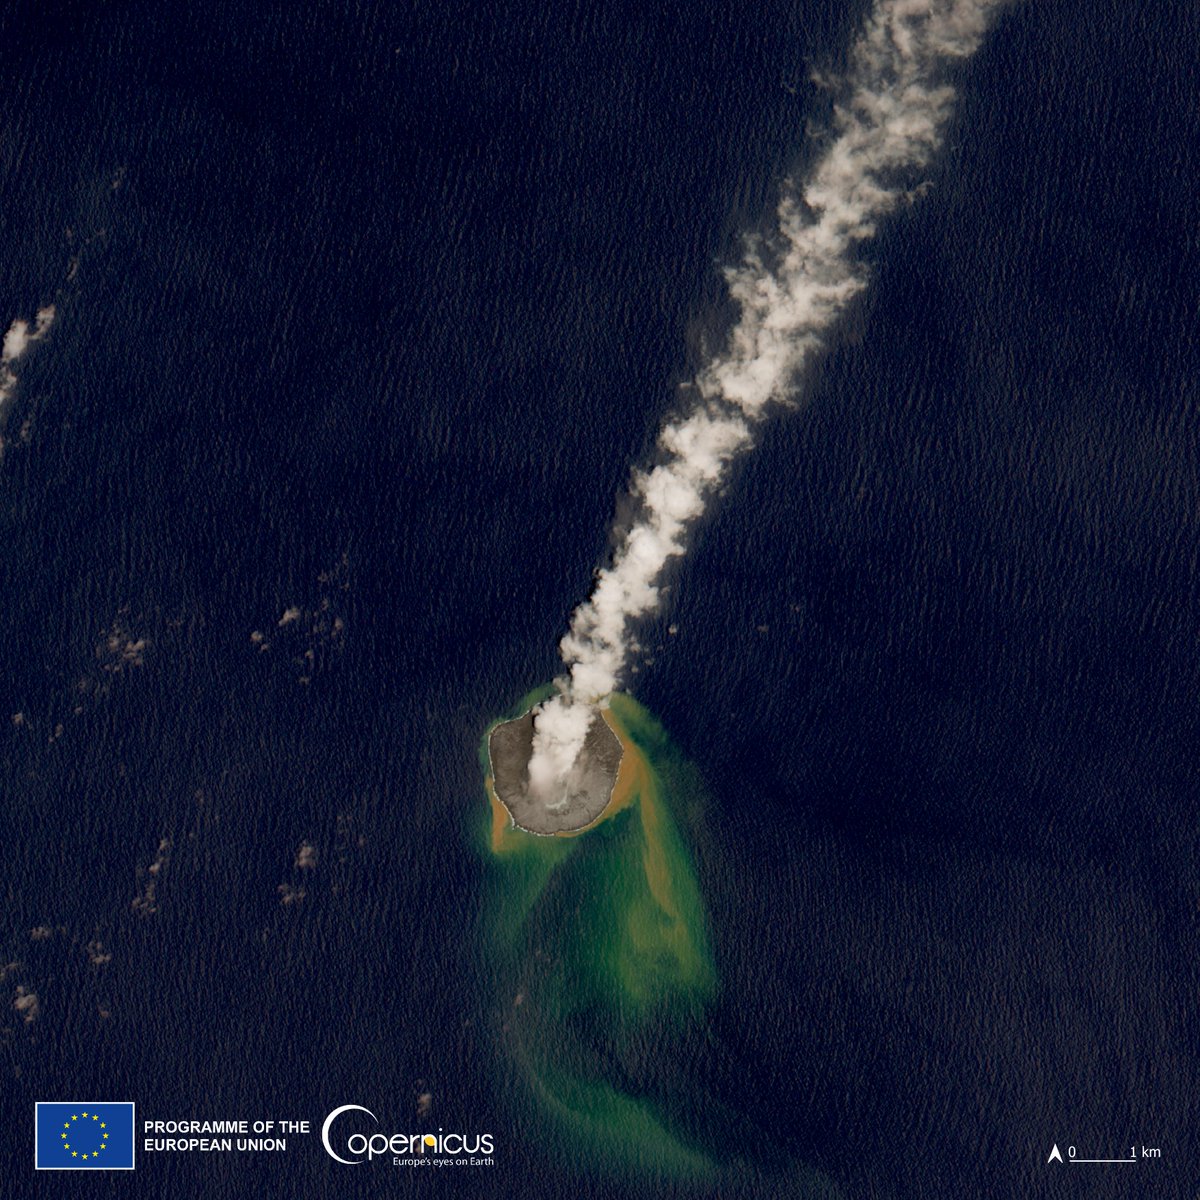 #Copernicus for #volcano monitoring

Strong degassing continues at the #Nishinoshima #volcano🇯🇵 with continuous outflows of gas &  steam from the crater

On 15 June, #Sentinel2🇪🇺🛰️ captured this image of the volcano. The plume of steam and gases traveled a distance of 1⃣0⃣0⃣ km